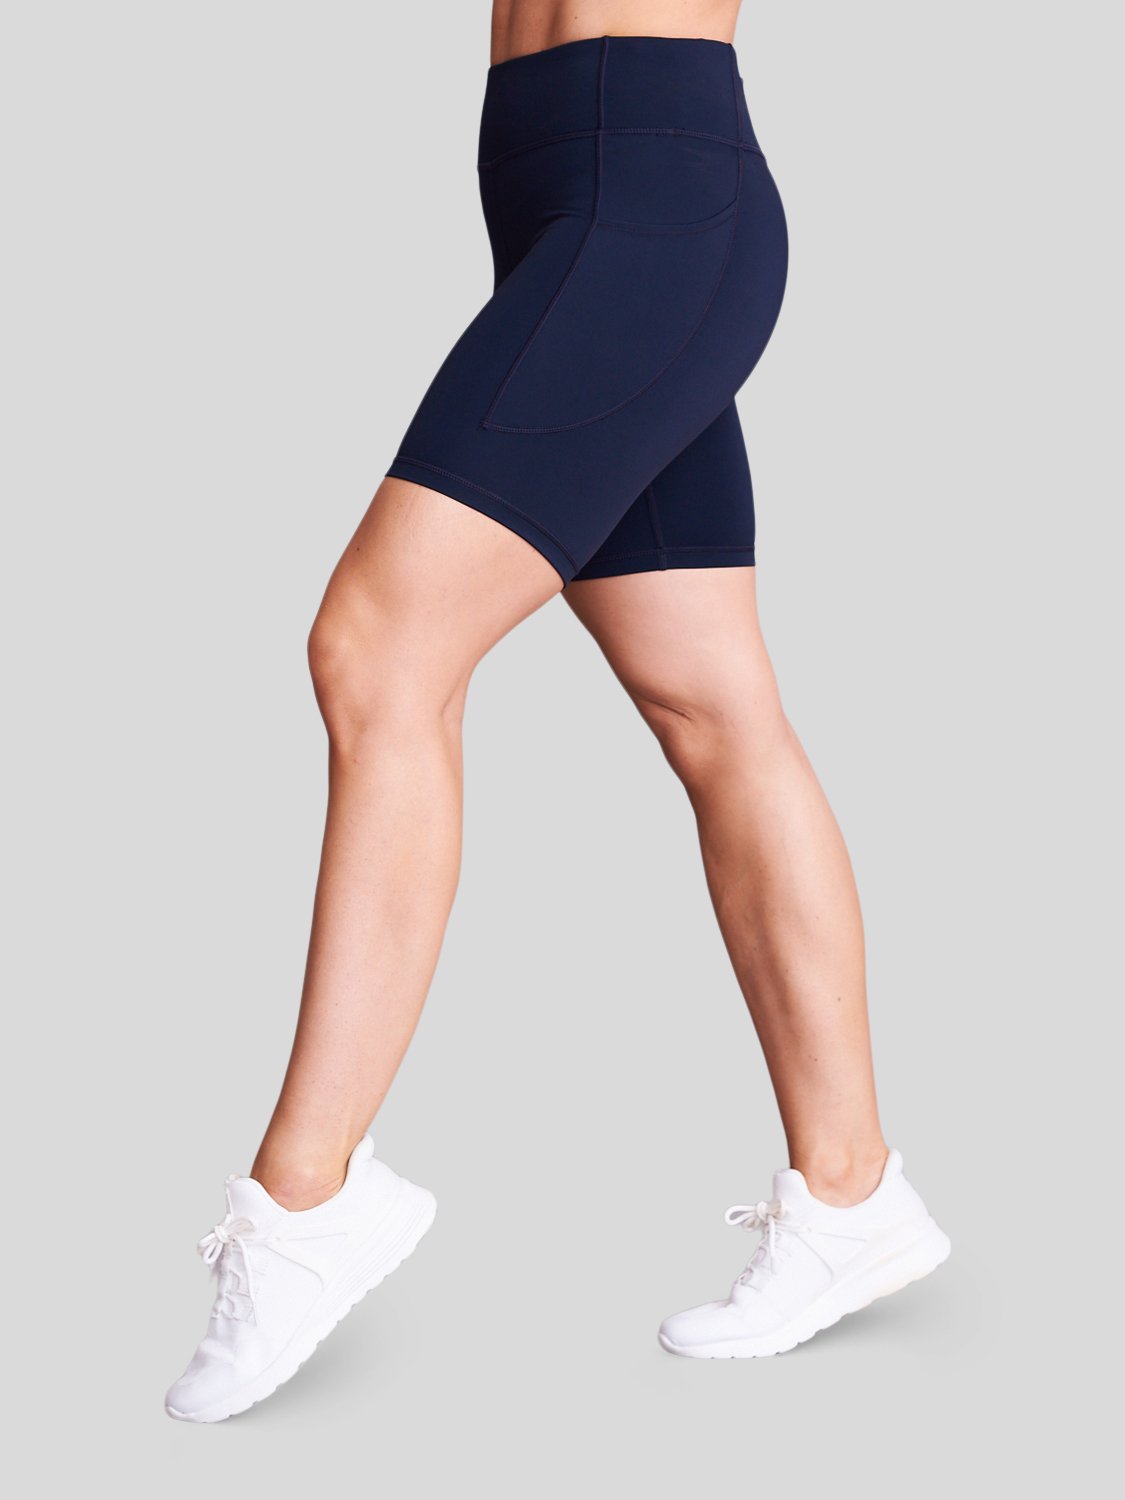 High Waisted Compression Shorts - Navy